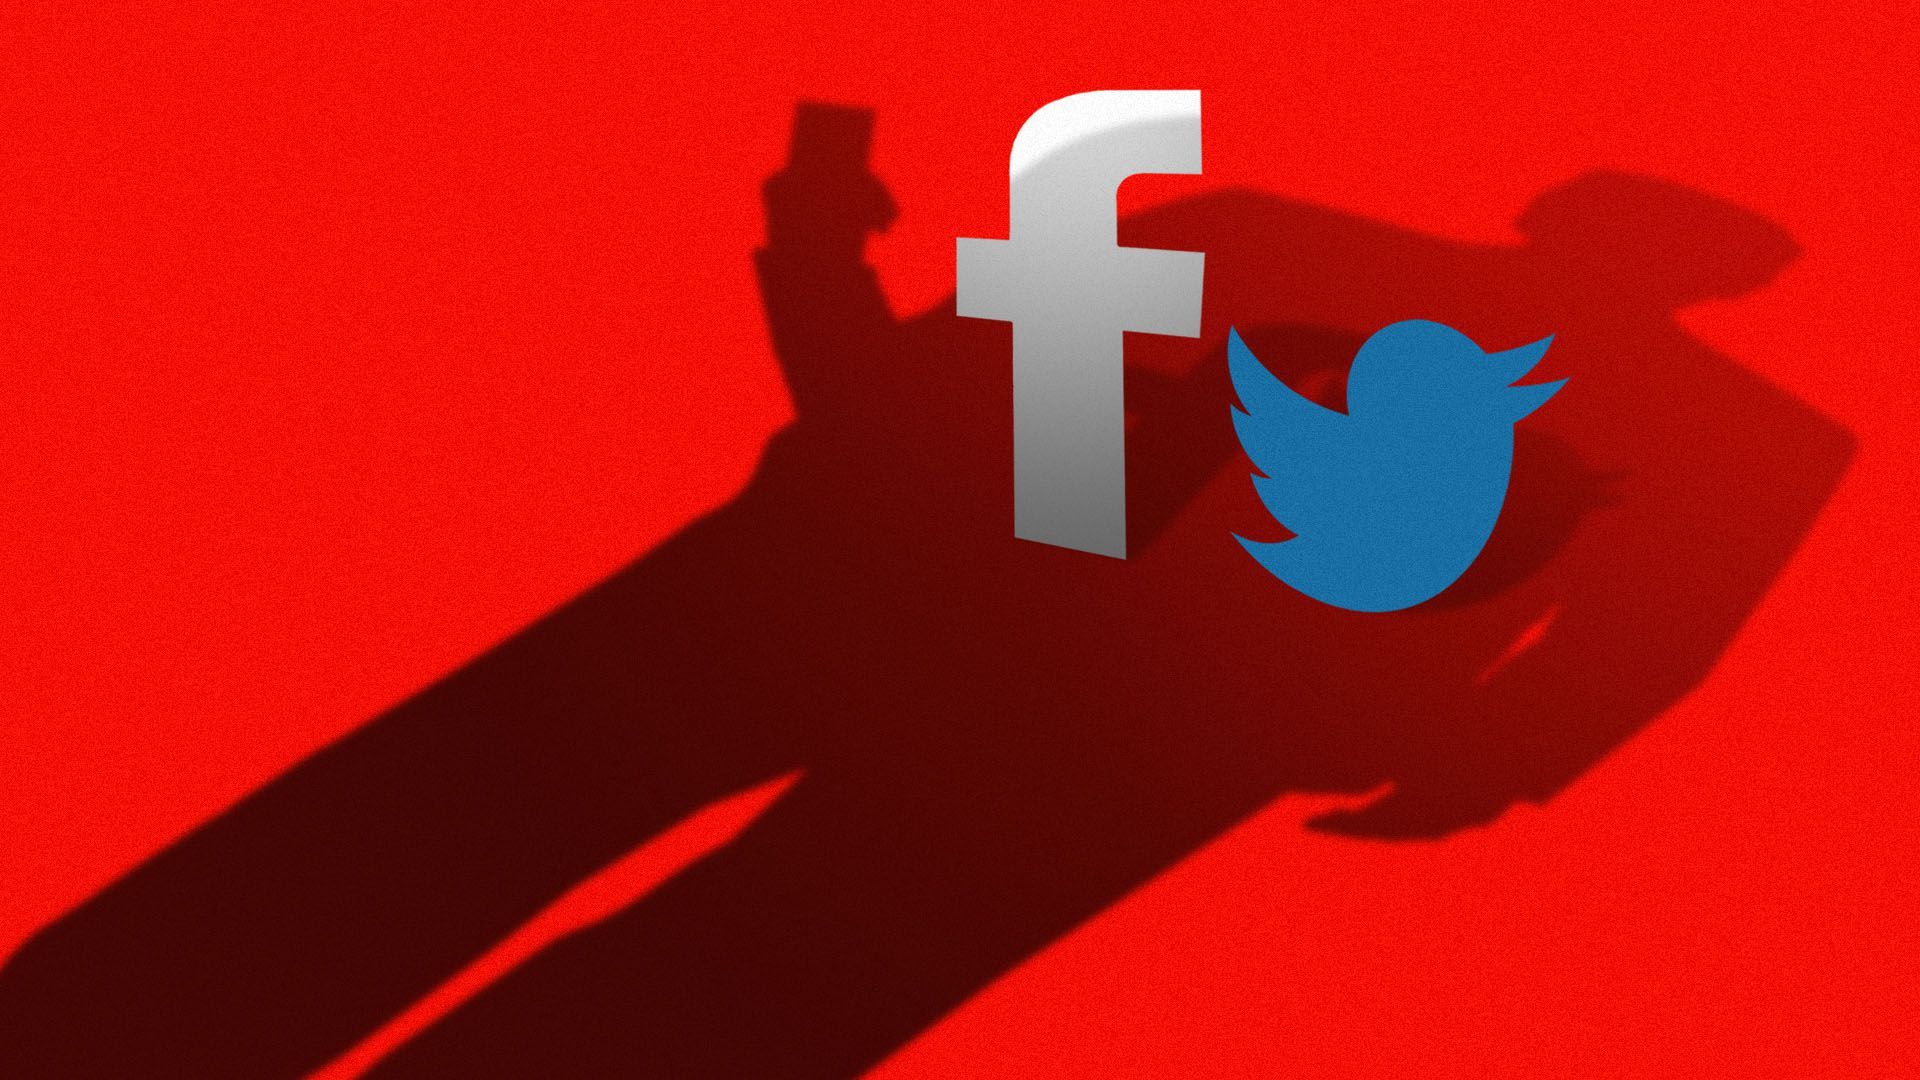 Illustration of President Trump's shadow being cast over the logos of Facebook and Twitter